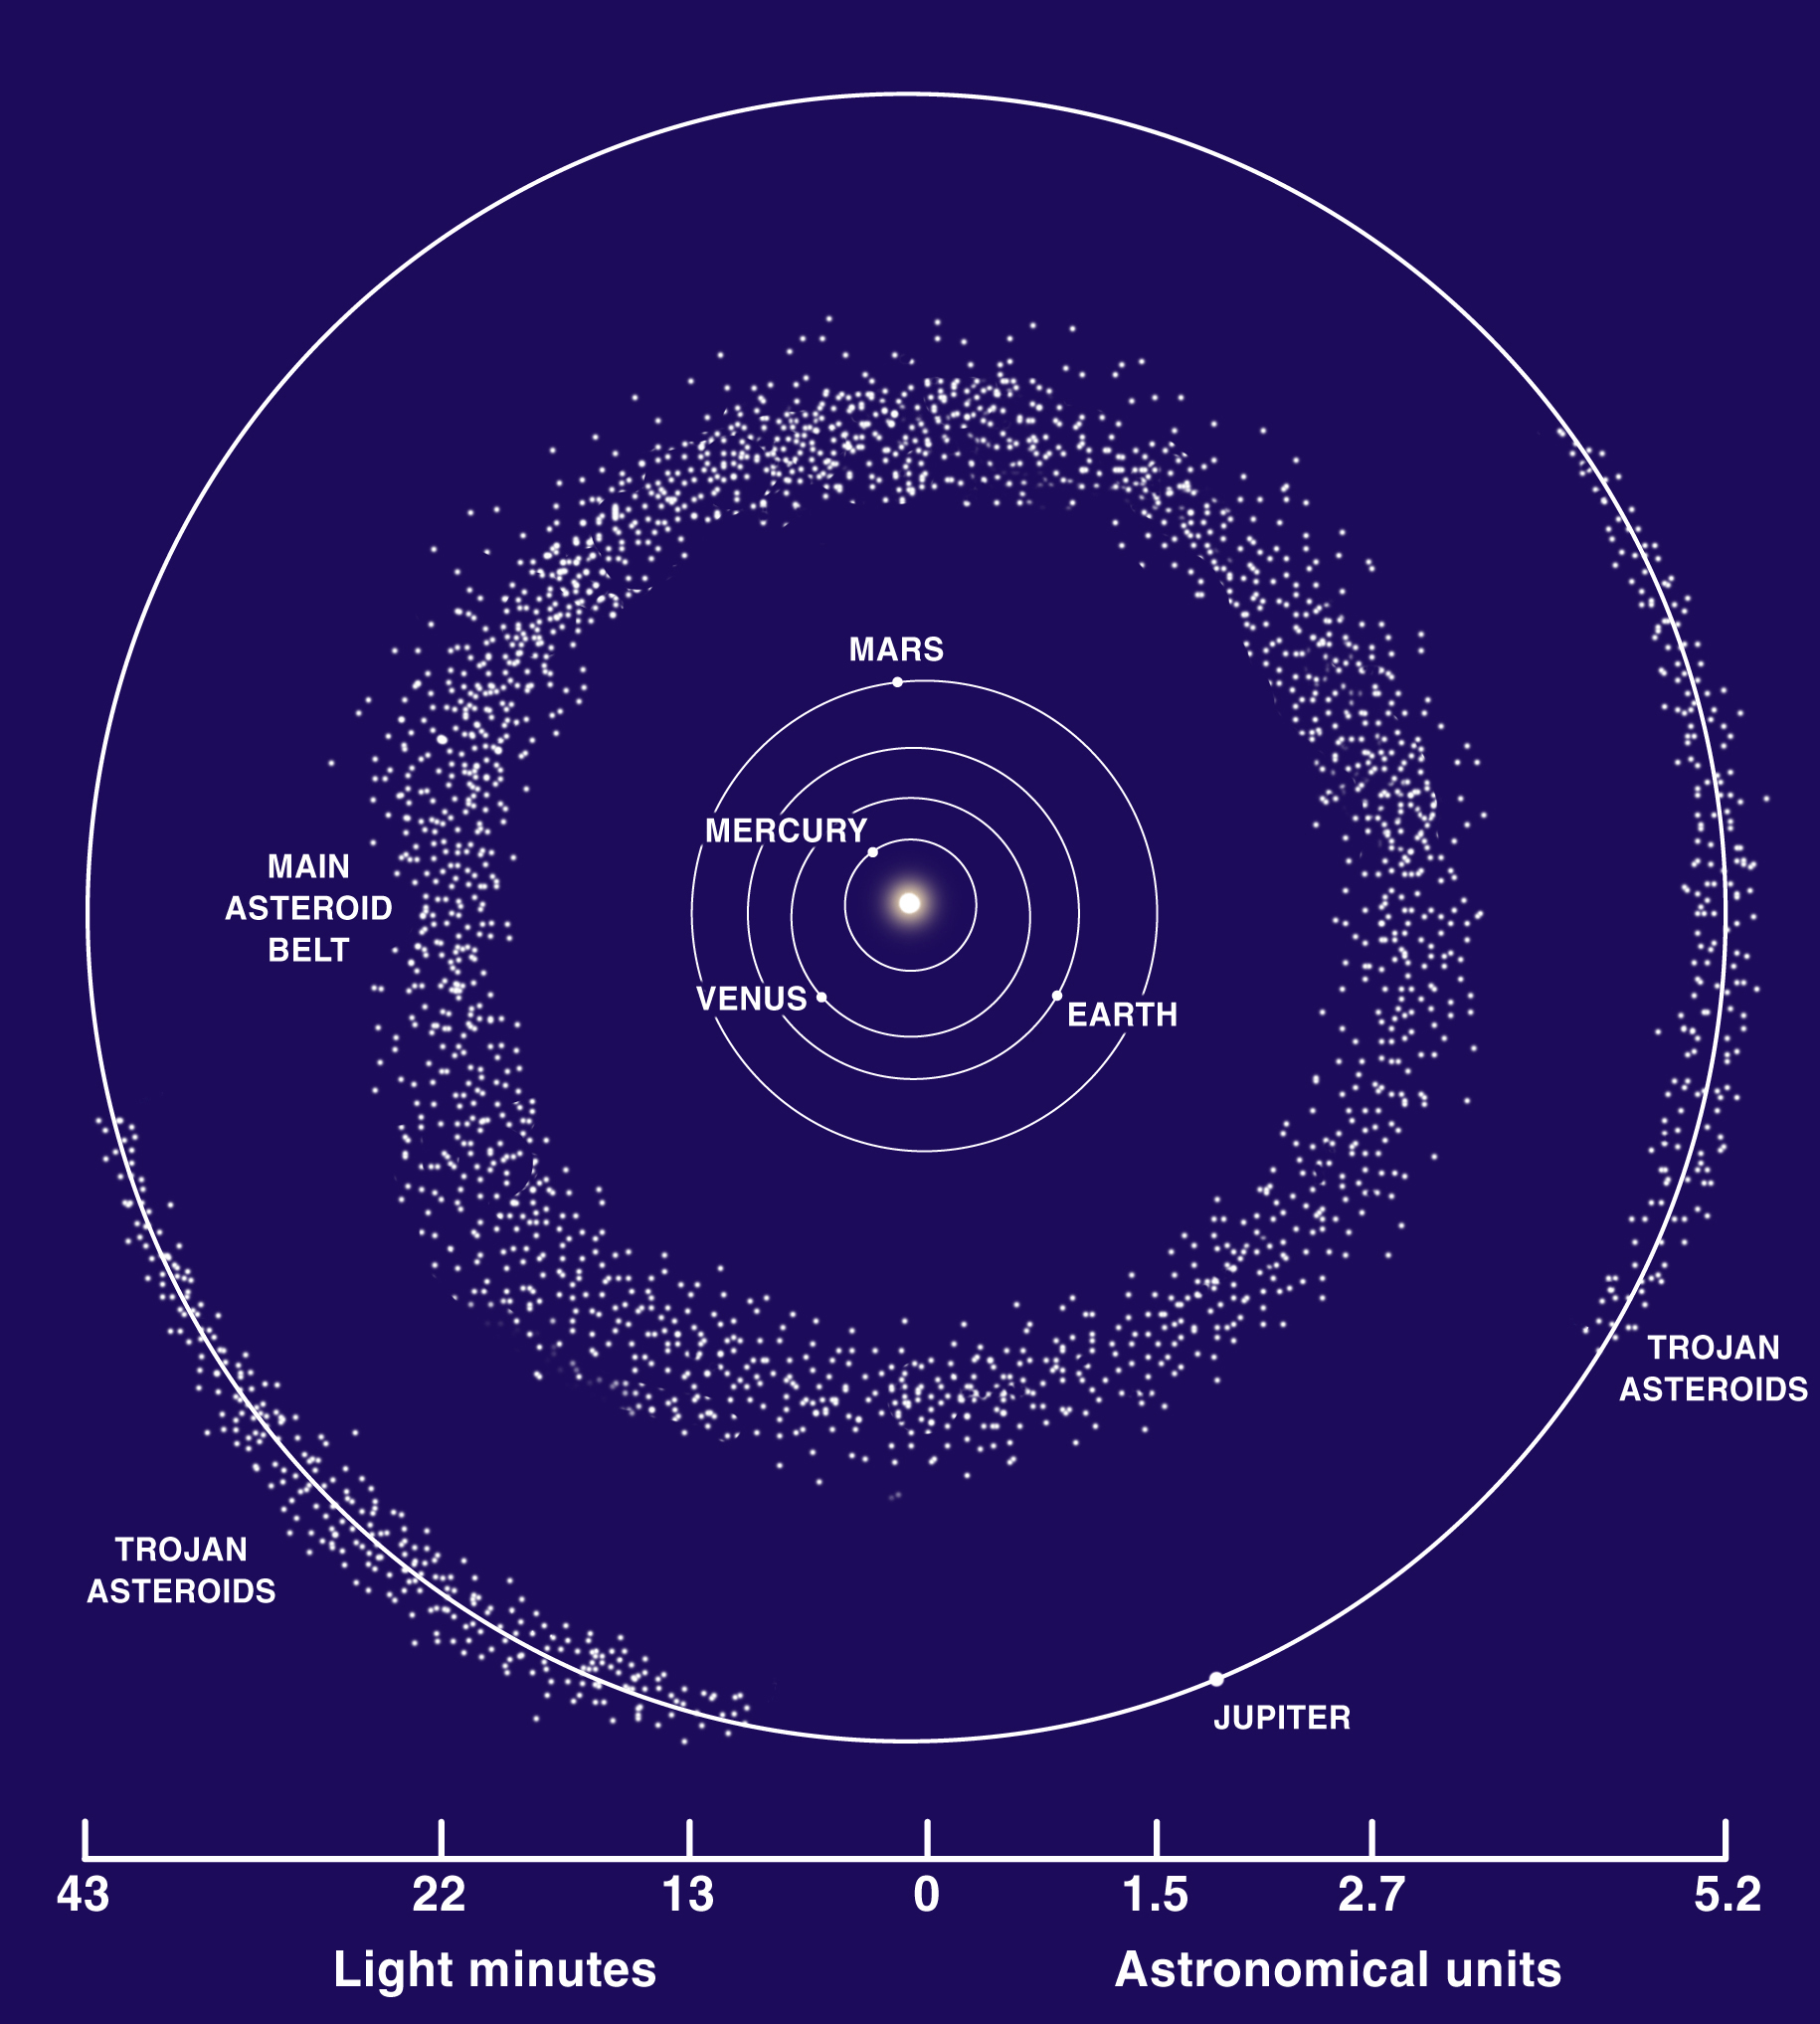 Diagram showing the locations of the inner solar system planets, the Main Asteroid Belt, and Jupiter and the two groups of Trojan asteroids. The Lucy spacecraft will explore six asteroids in the Trojan group that leads Jupiter in its orbit (the L4 Lagrangian point).